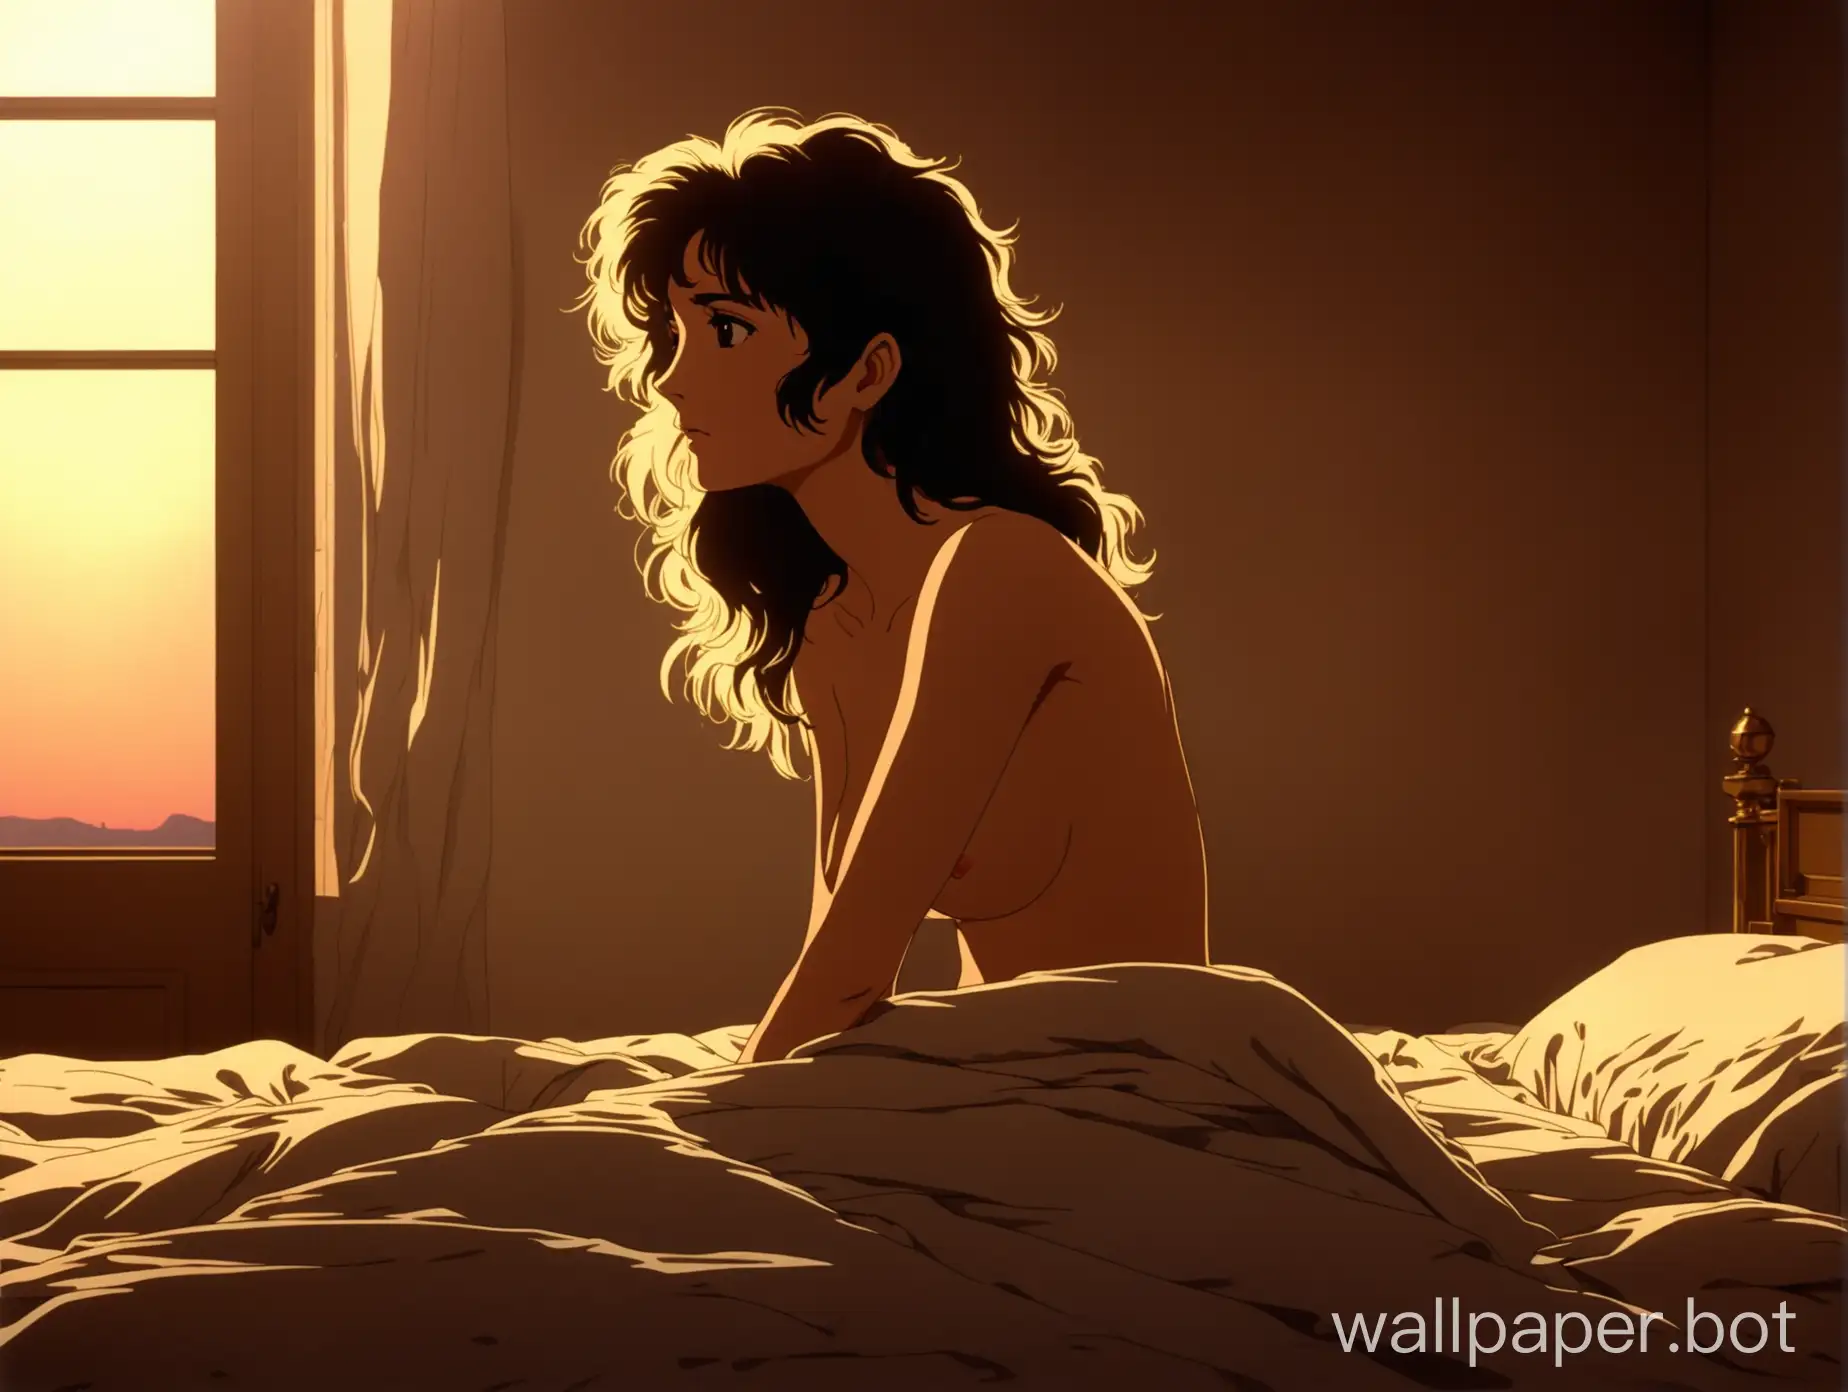 retro 1980s anime, full body portrait of a stunningly beautiful young Italian woman sitting up in bed, she just woke up, side view, topless, under the covers, lazy and tired, disheveled and messy, attractive breasts, Roman bedroom interior, sensual, golden hour lighting